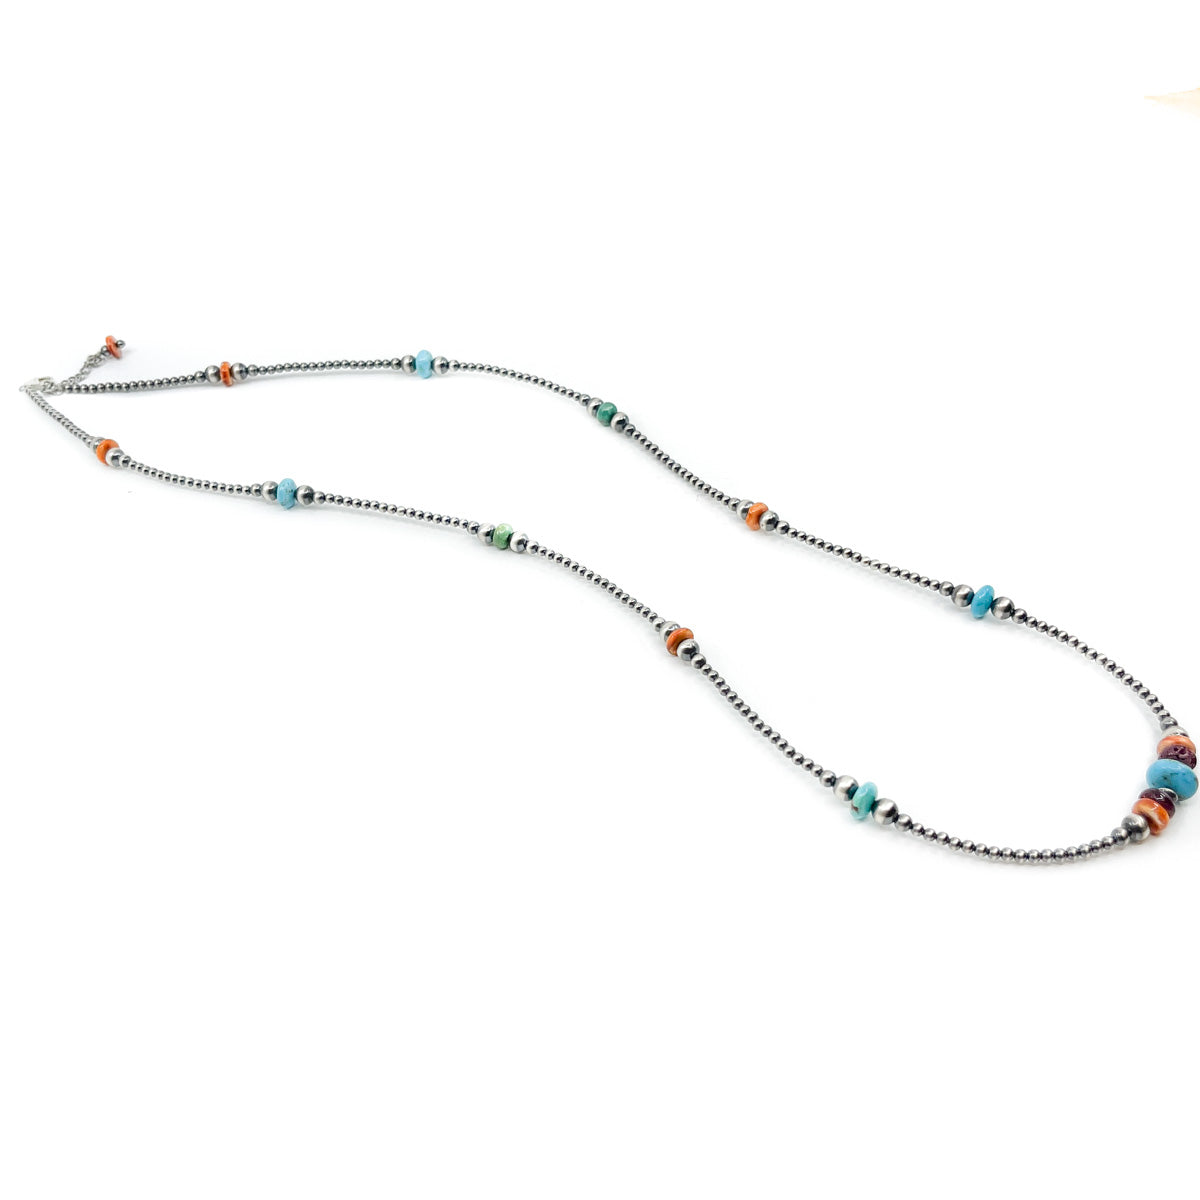 Handcrafted Silver bead & Heishe necklace Sterling Silver beads with Turquoise and Orange & Purple Spiny Oyster Shell Heishe beads Sterling Silver lobster claw clasp Measures approximately 32 inches long with 2 inch extender *All sales on jewelry are final. No returns or exchanges